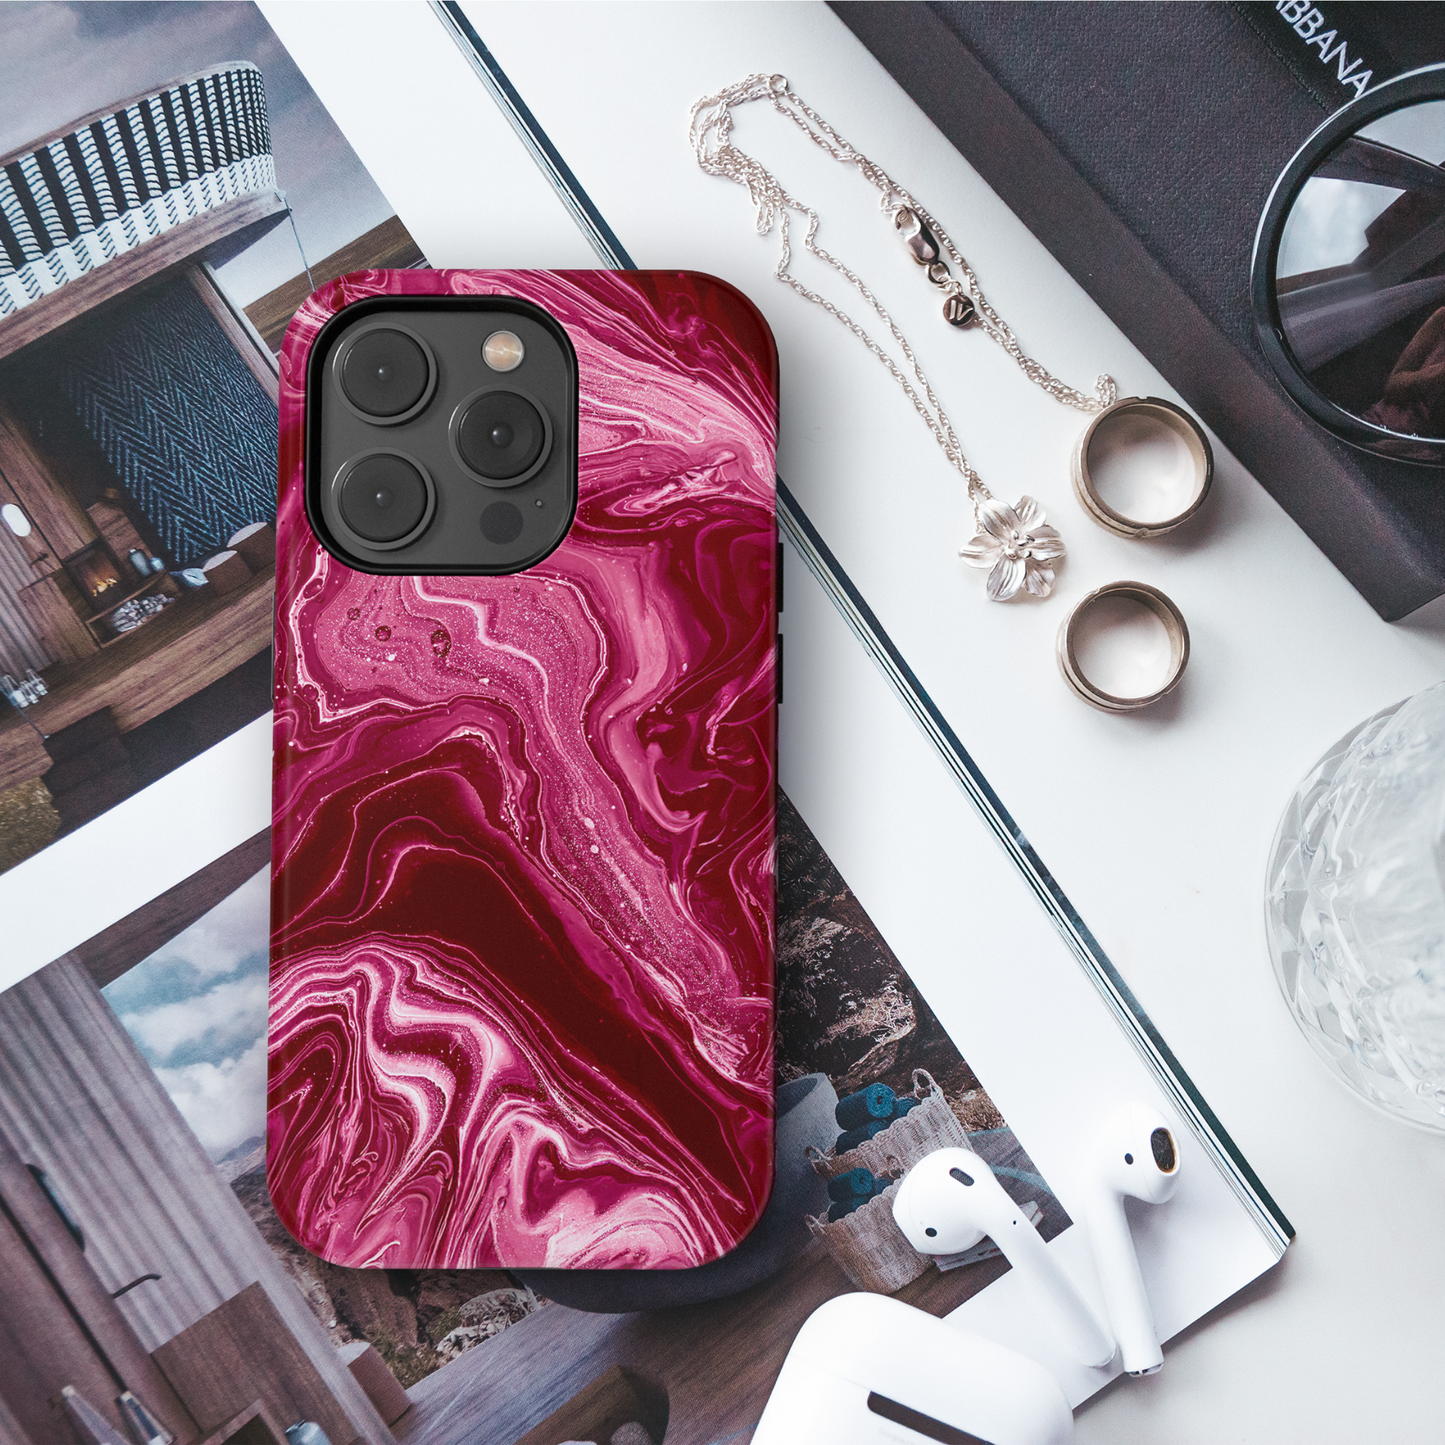 Jewel Obsession iPhone Case